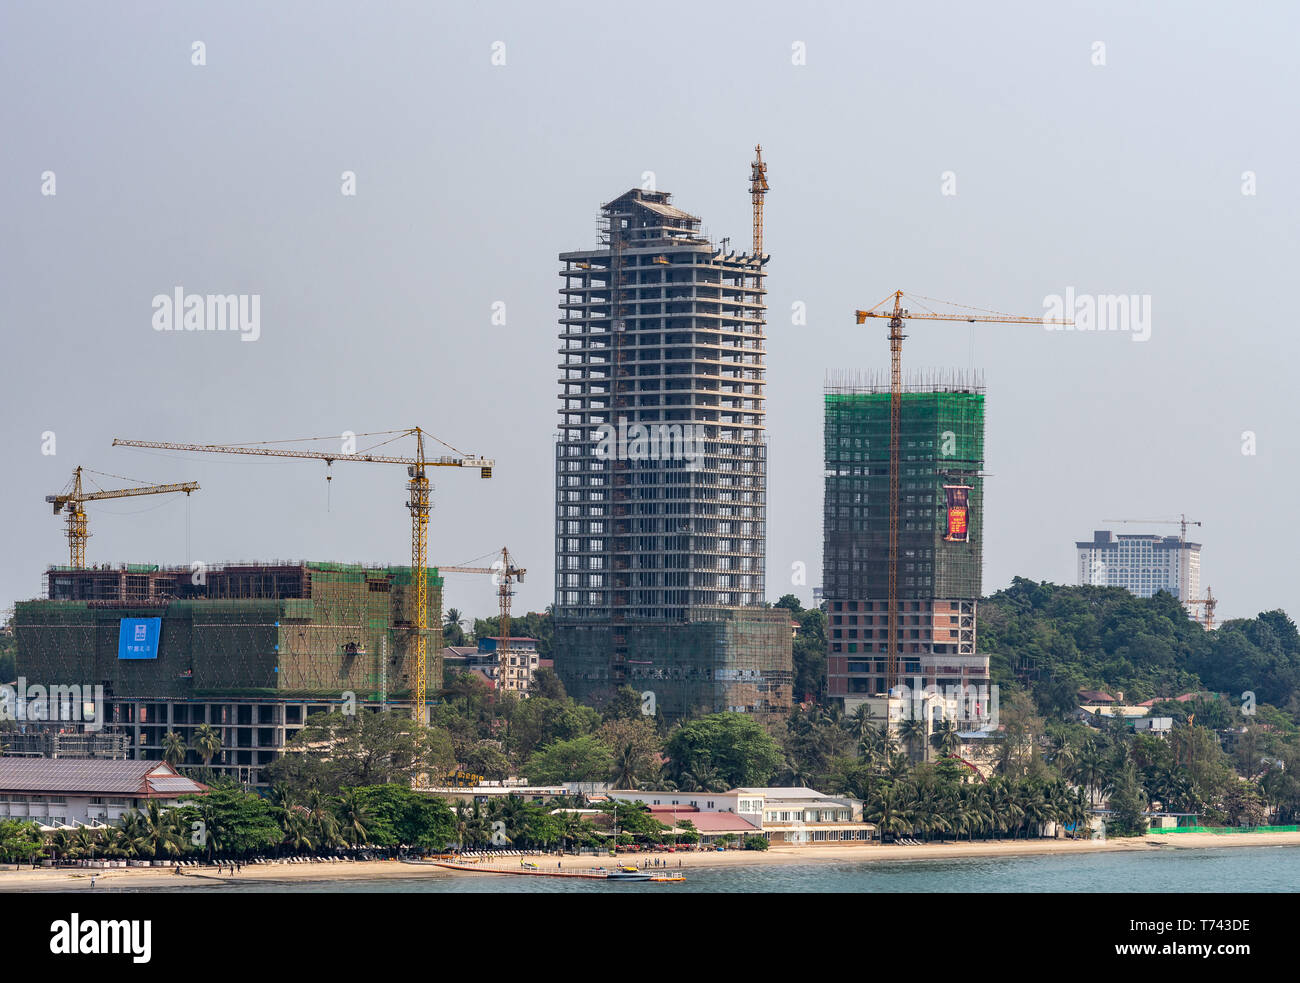 Sihanoukville, Cambodia - March 15, 2019: Shoreline turned into massive construction site of tall high rise buildings under light blue sky, yellow cra Stock Photo